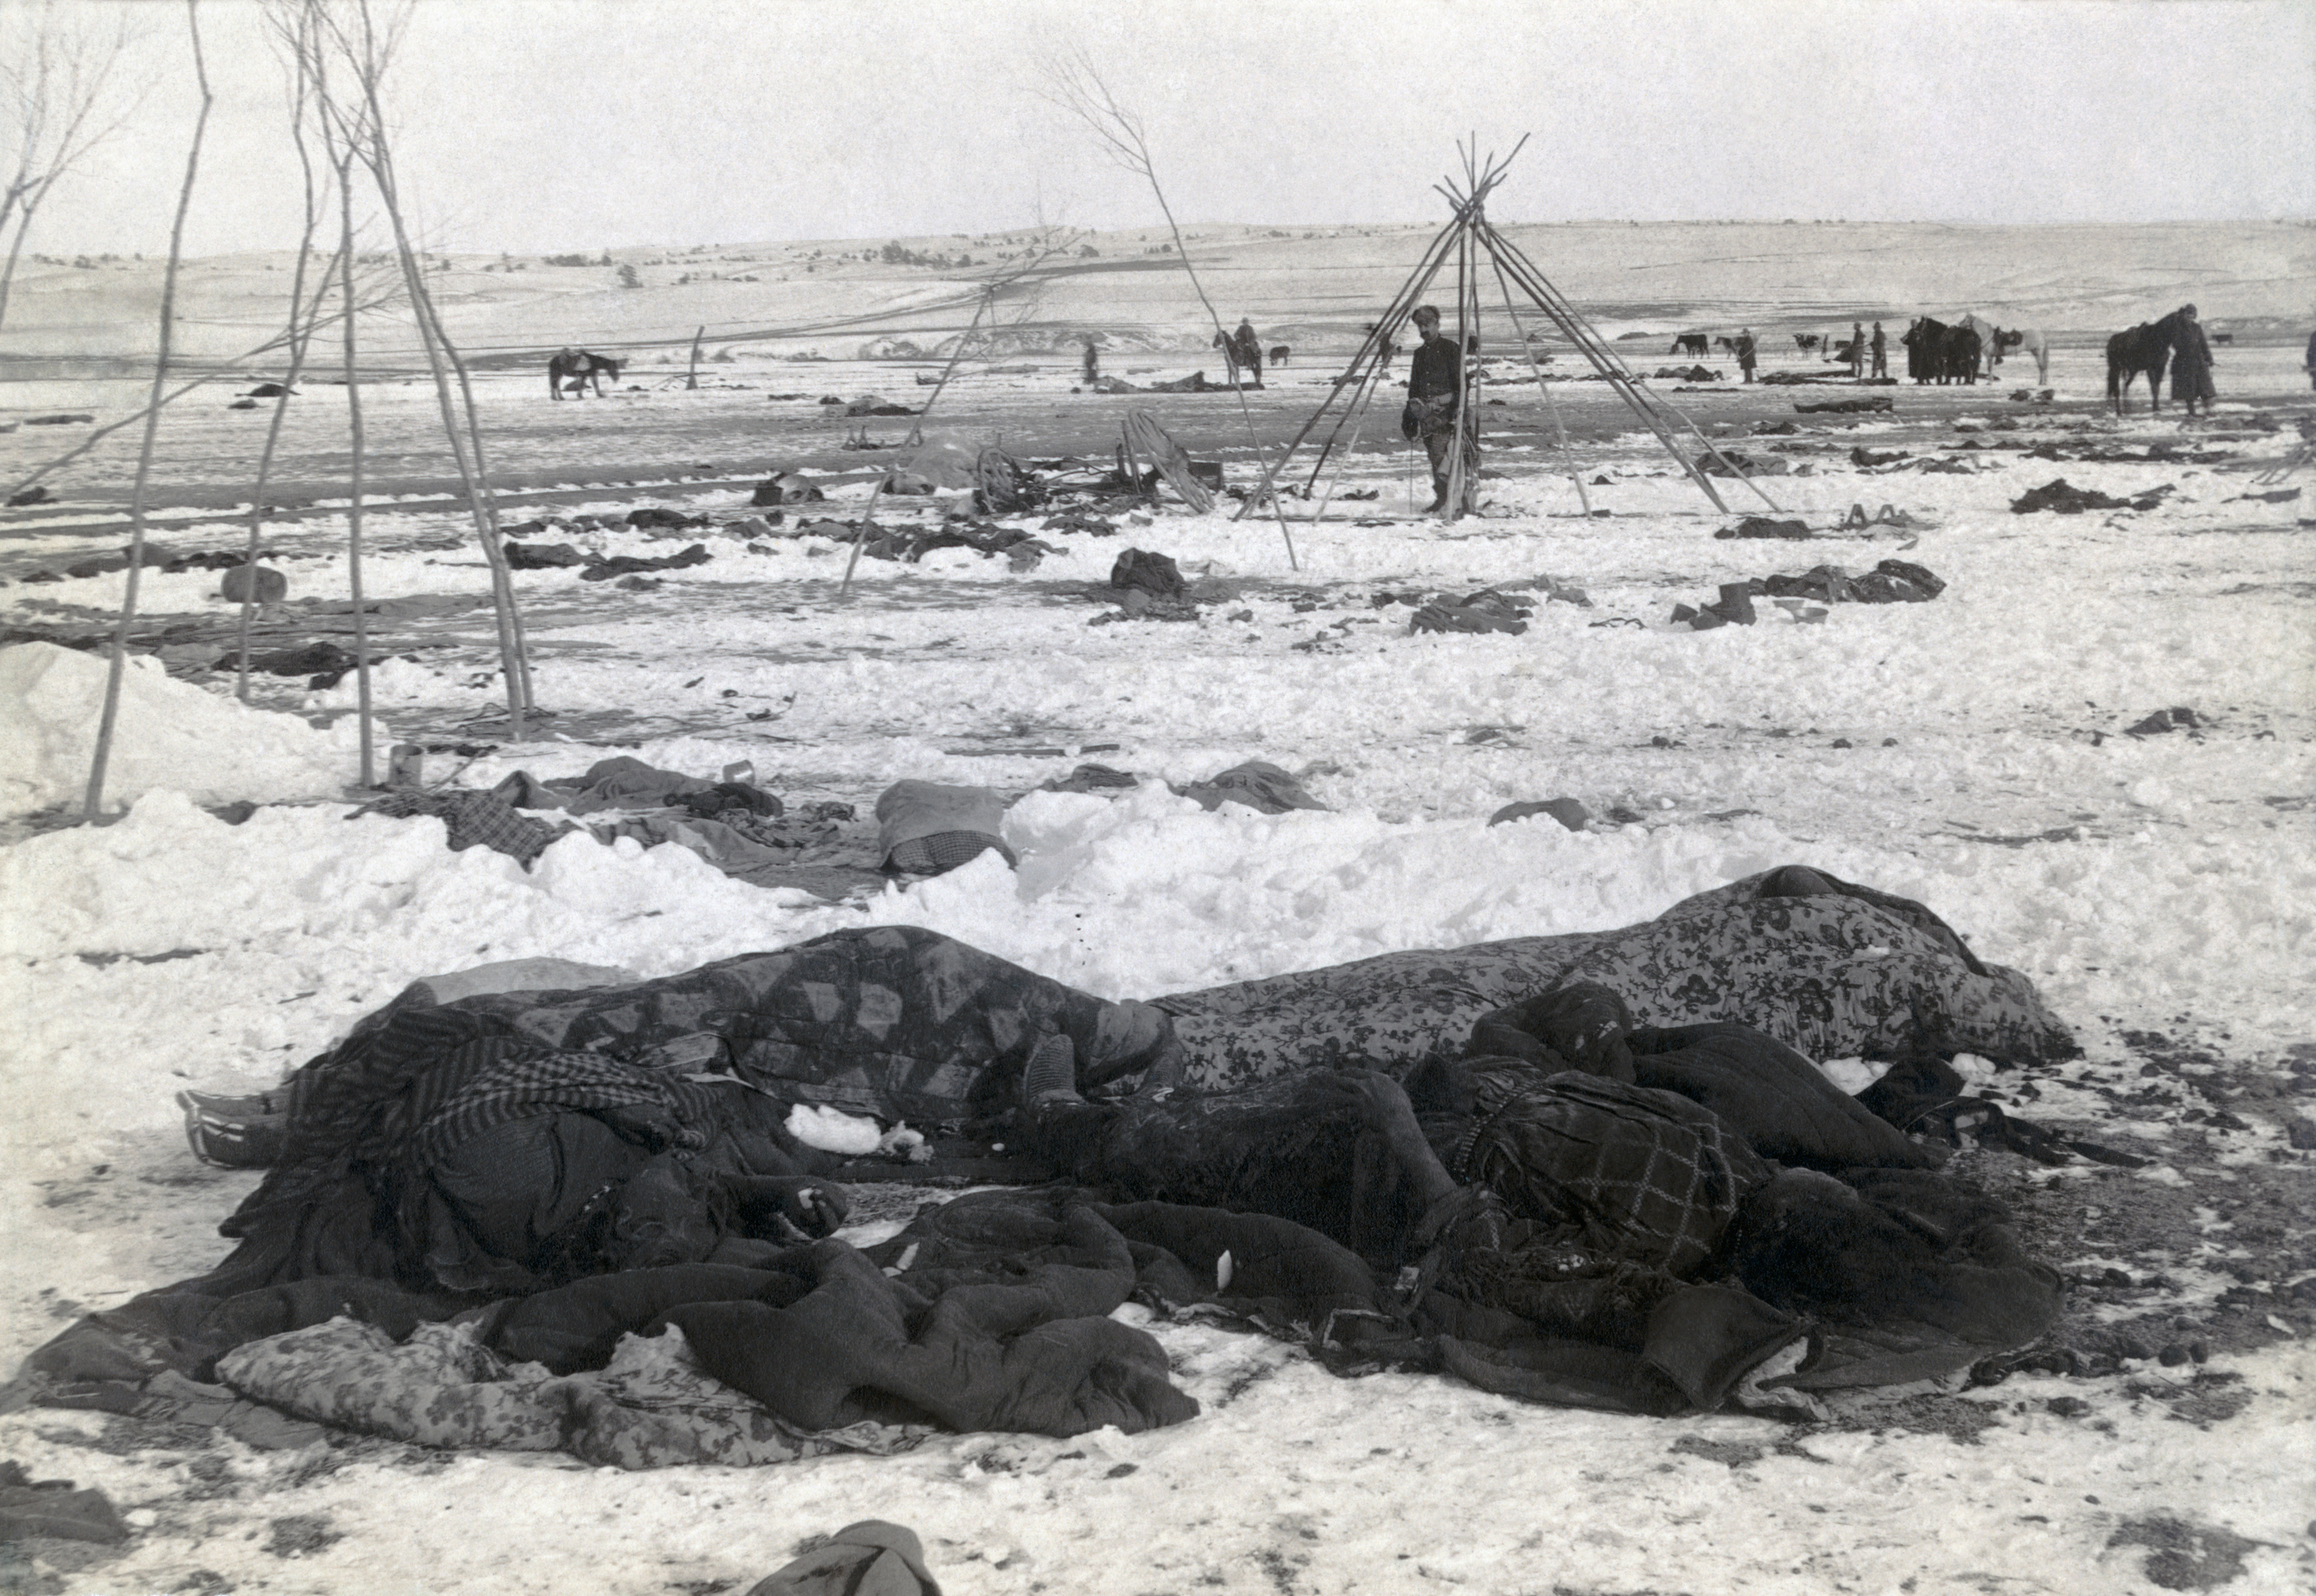 Wounded Knee aftermath.